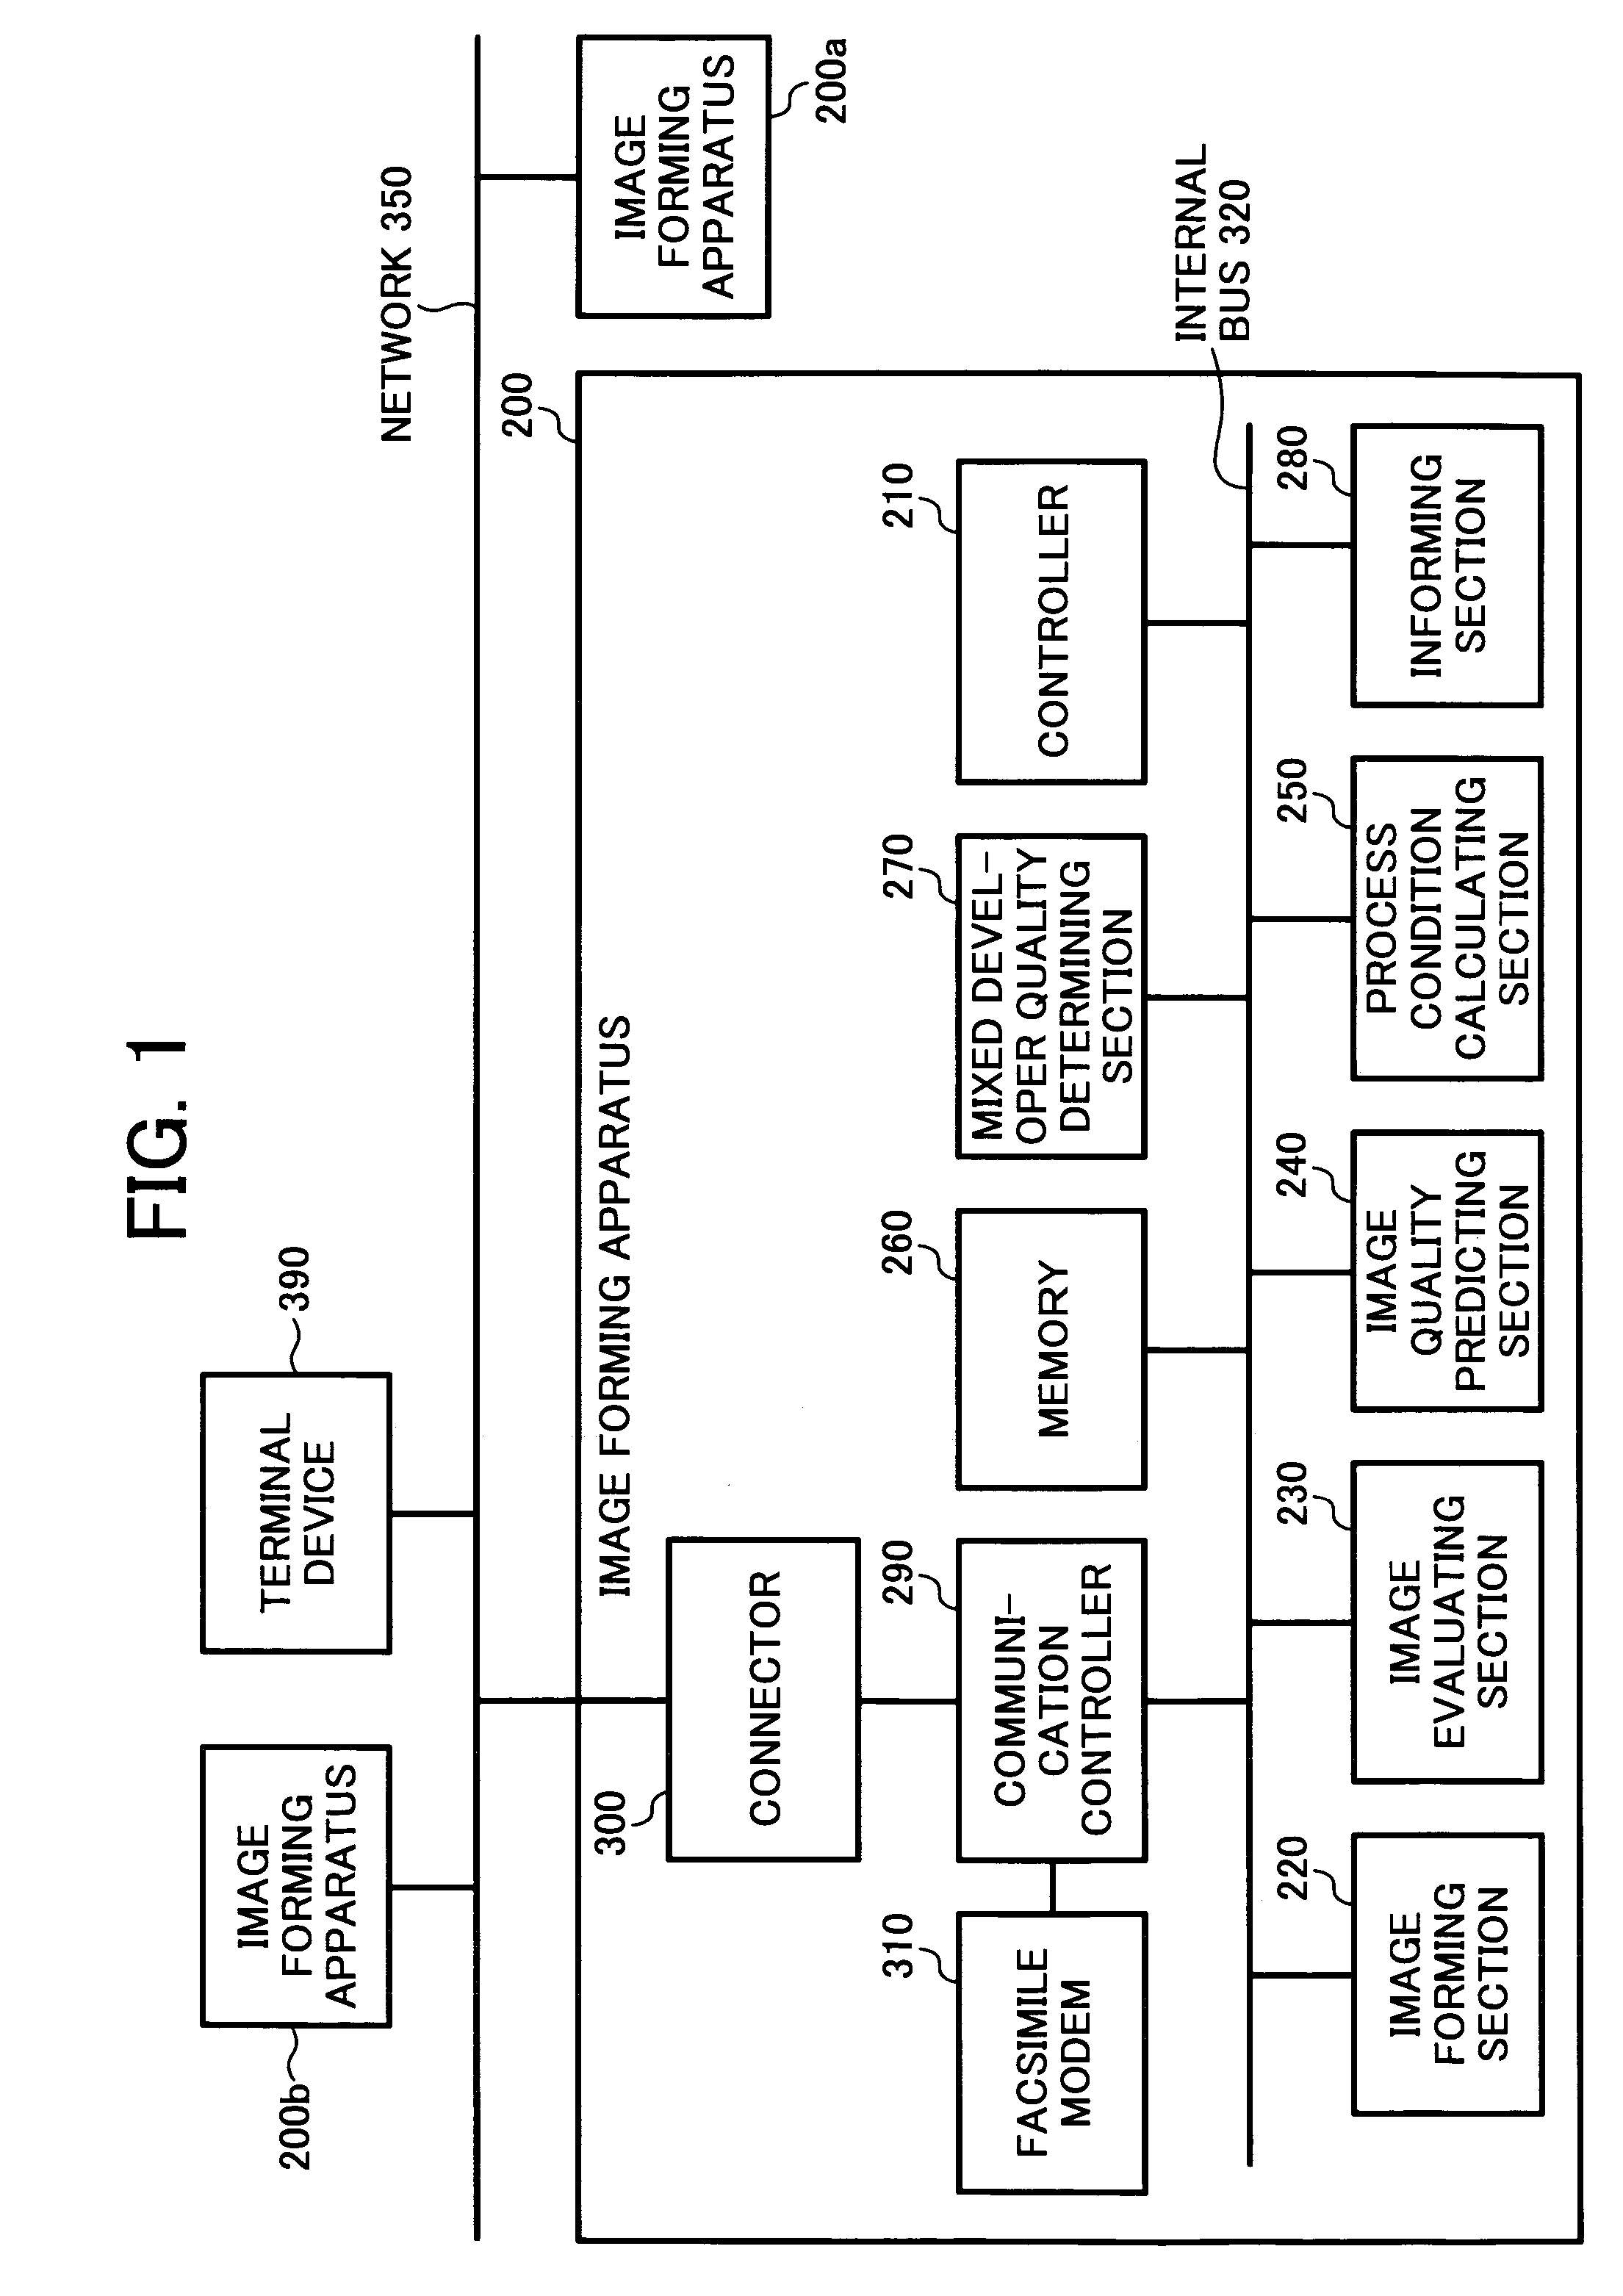 Image forming apparatus, image forming system, image forming condition adjusting method, computer program carrying out the image forming condition adjusting method, and recording medium storing the program